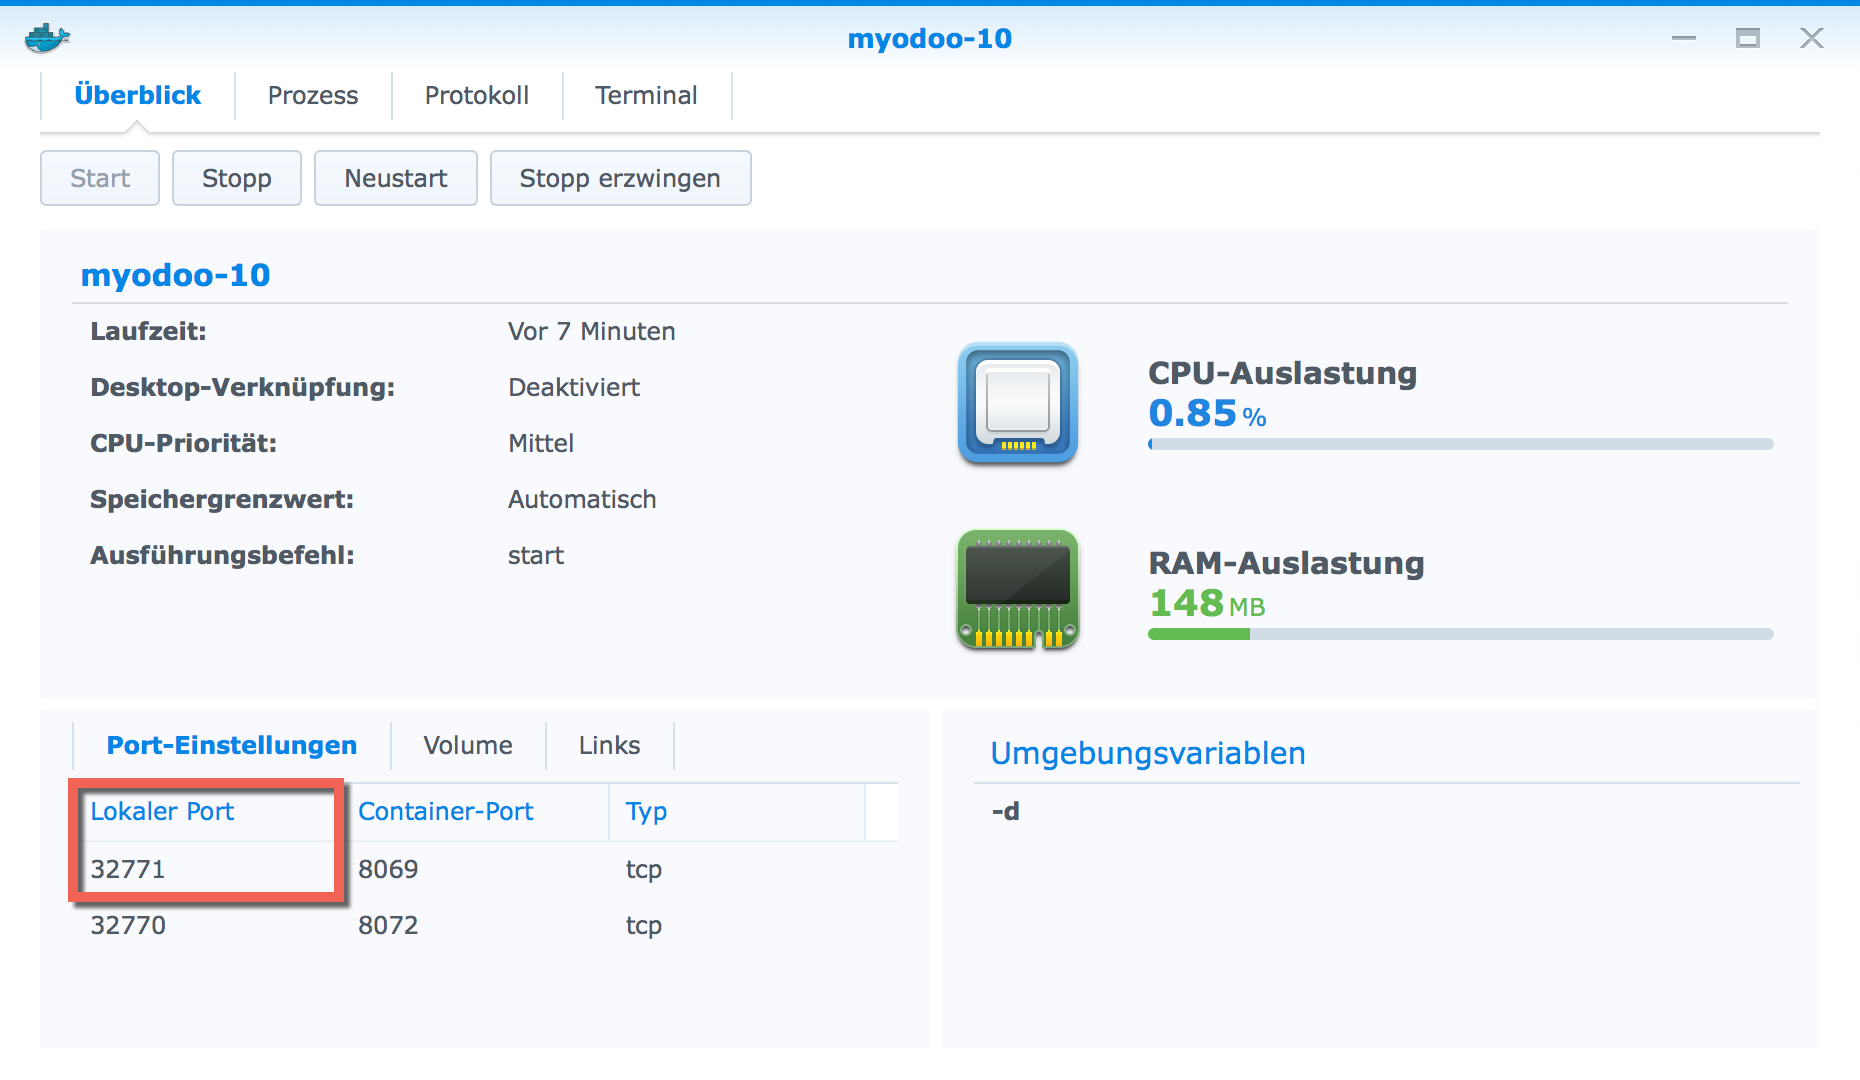 Docker - Synology MyOdoo Container Details